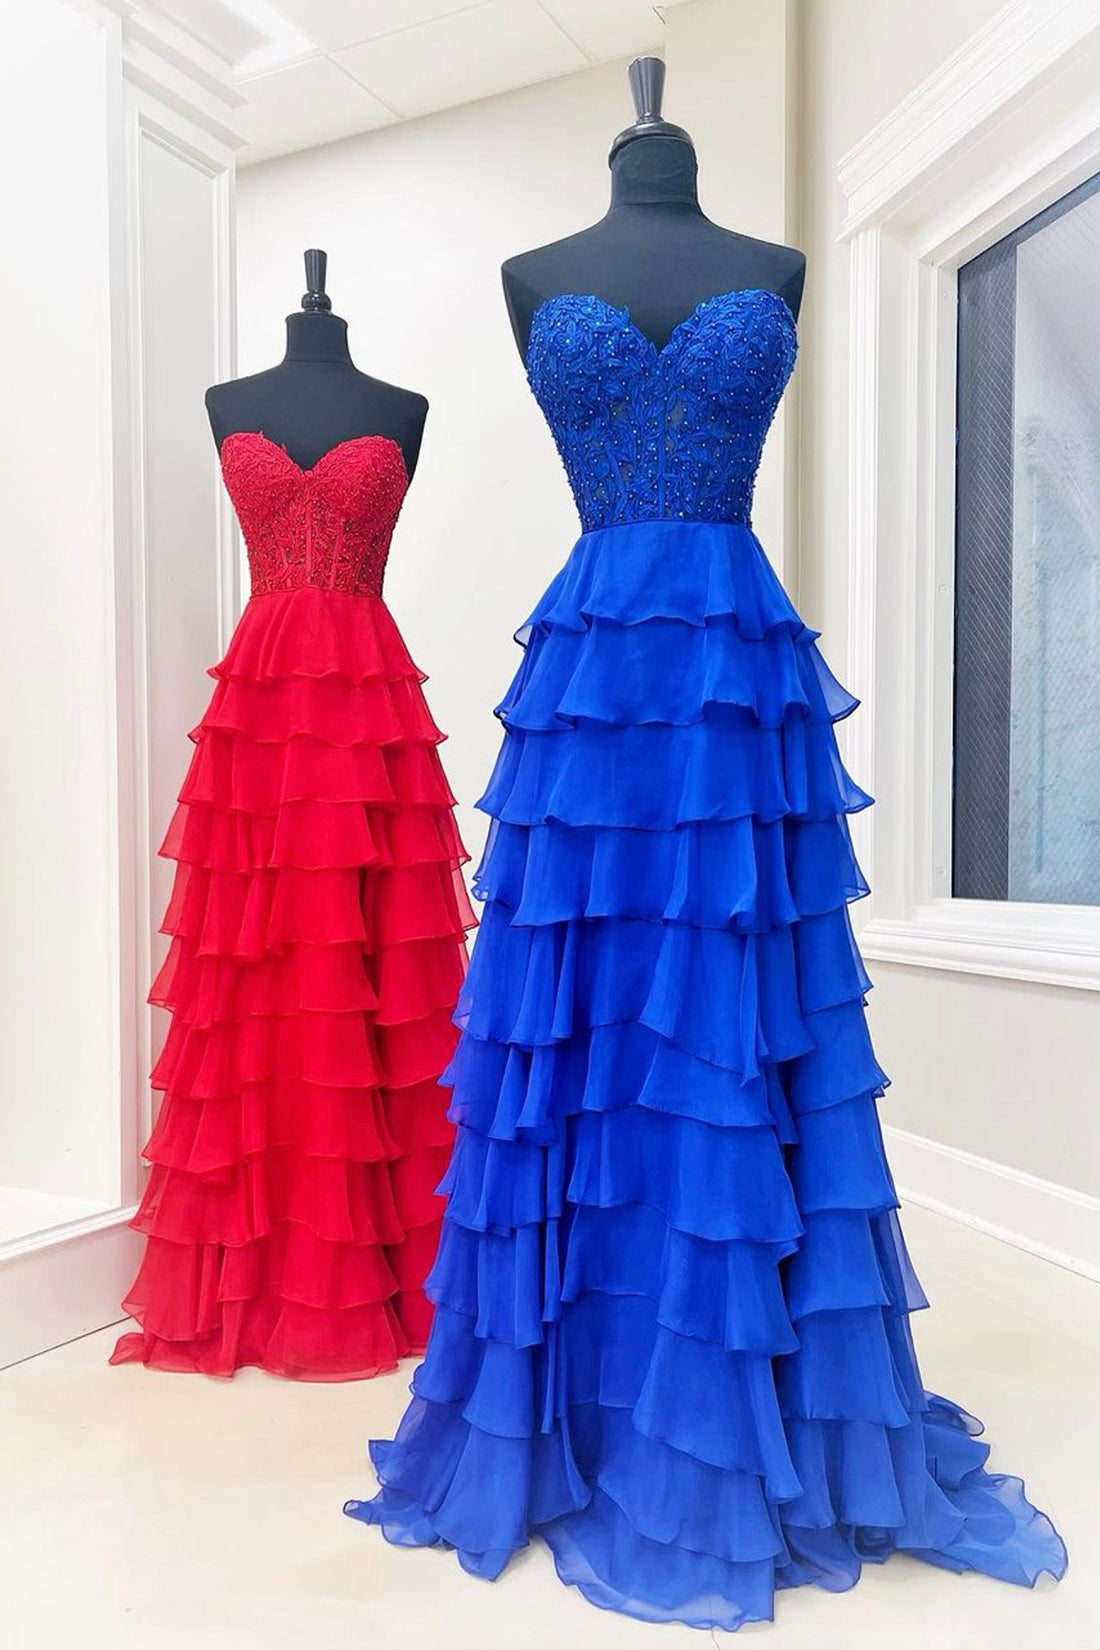 Lovely Strapless Chiffon Lace Long Prom Dress, A-Line Sweetheart Neck Evening Party Dress